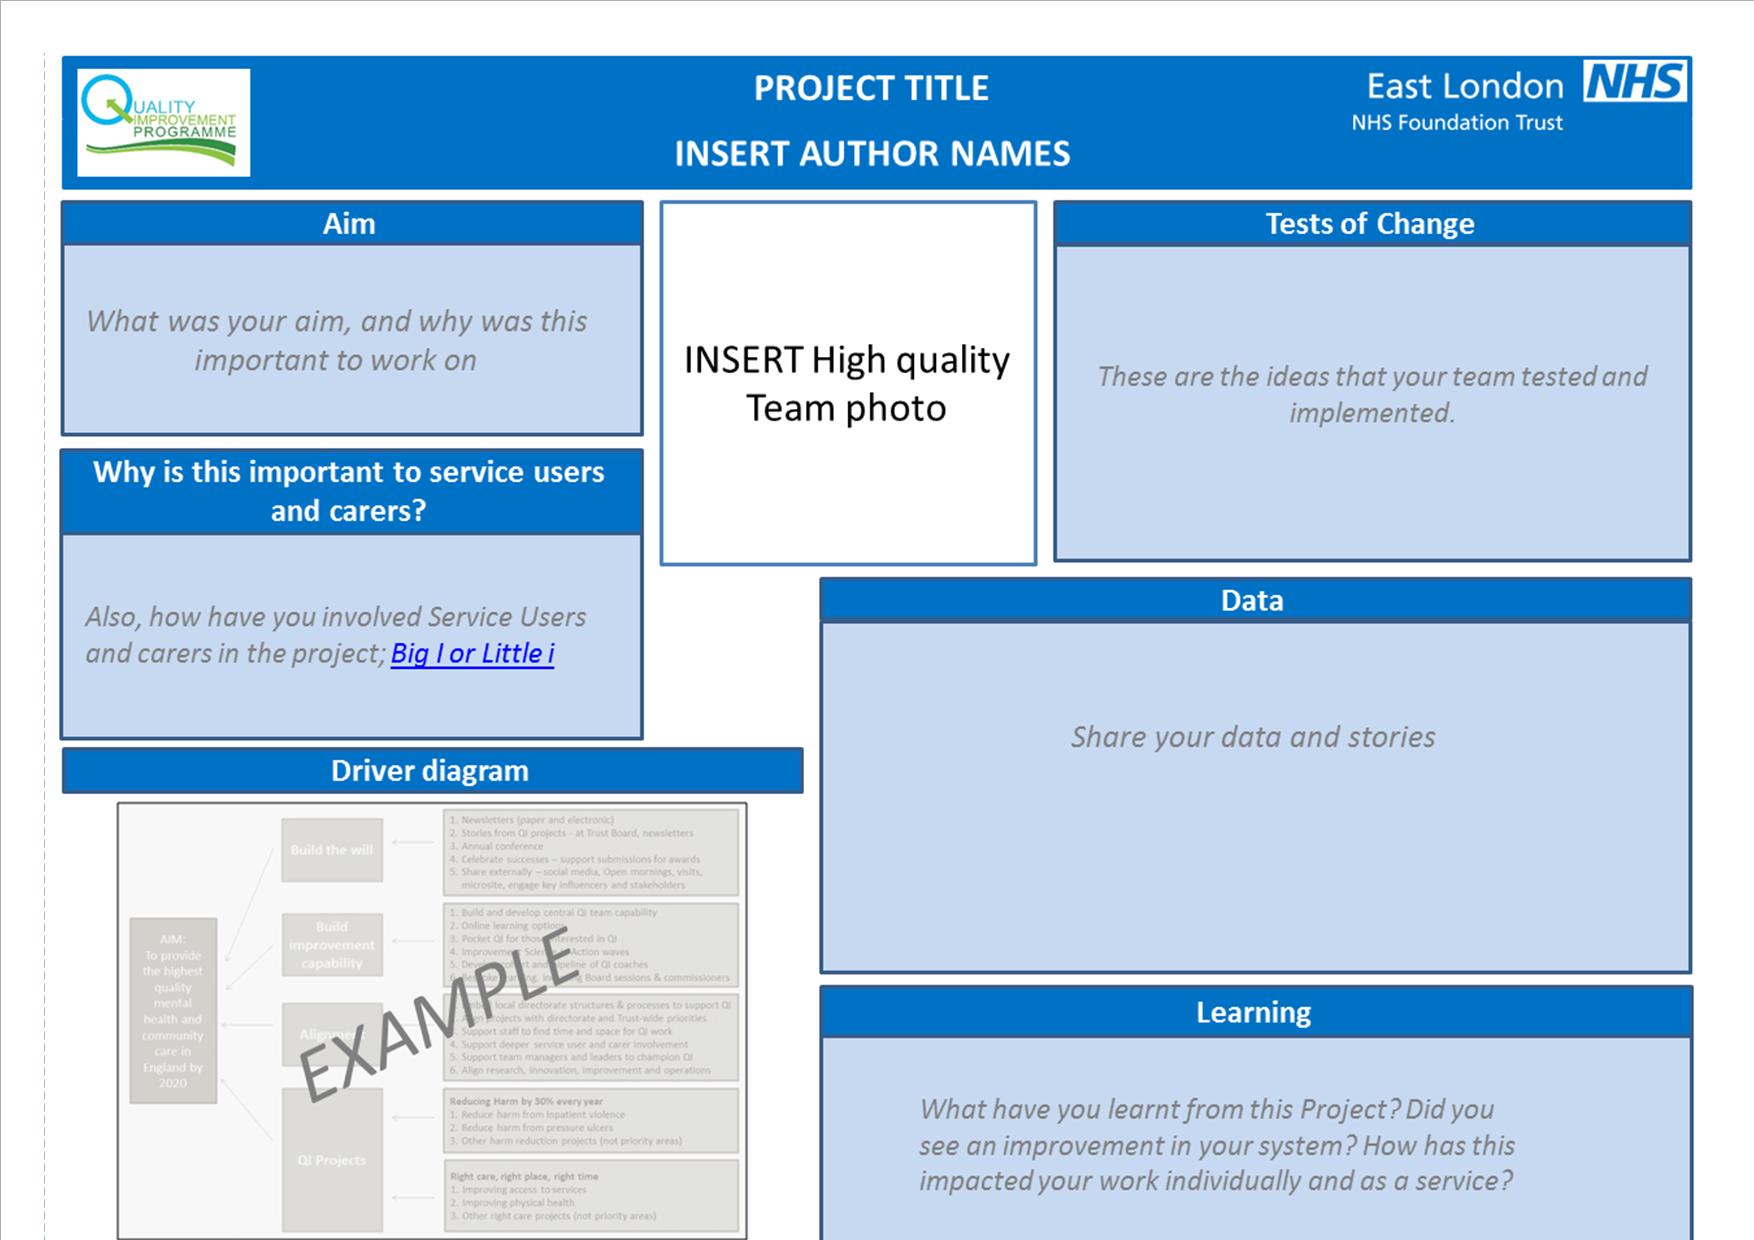 Completed project poster template : Quality Improvement East London